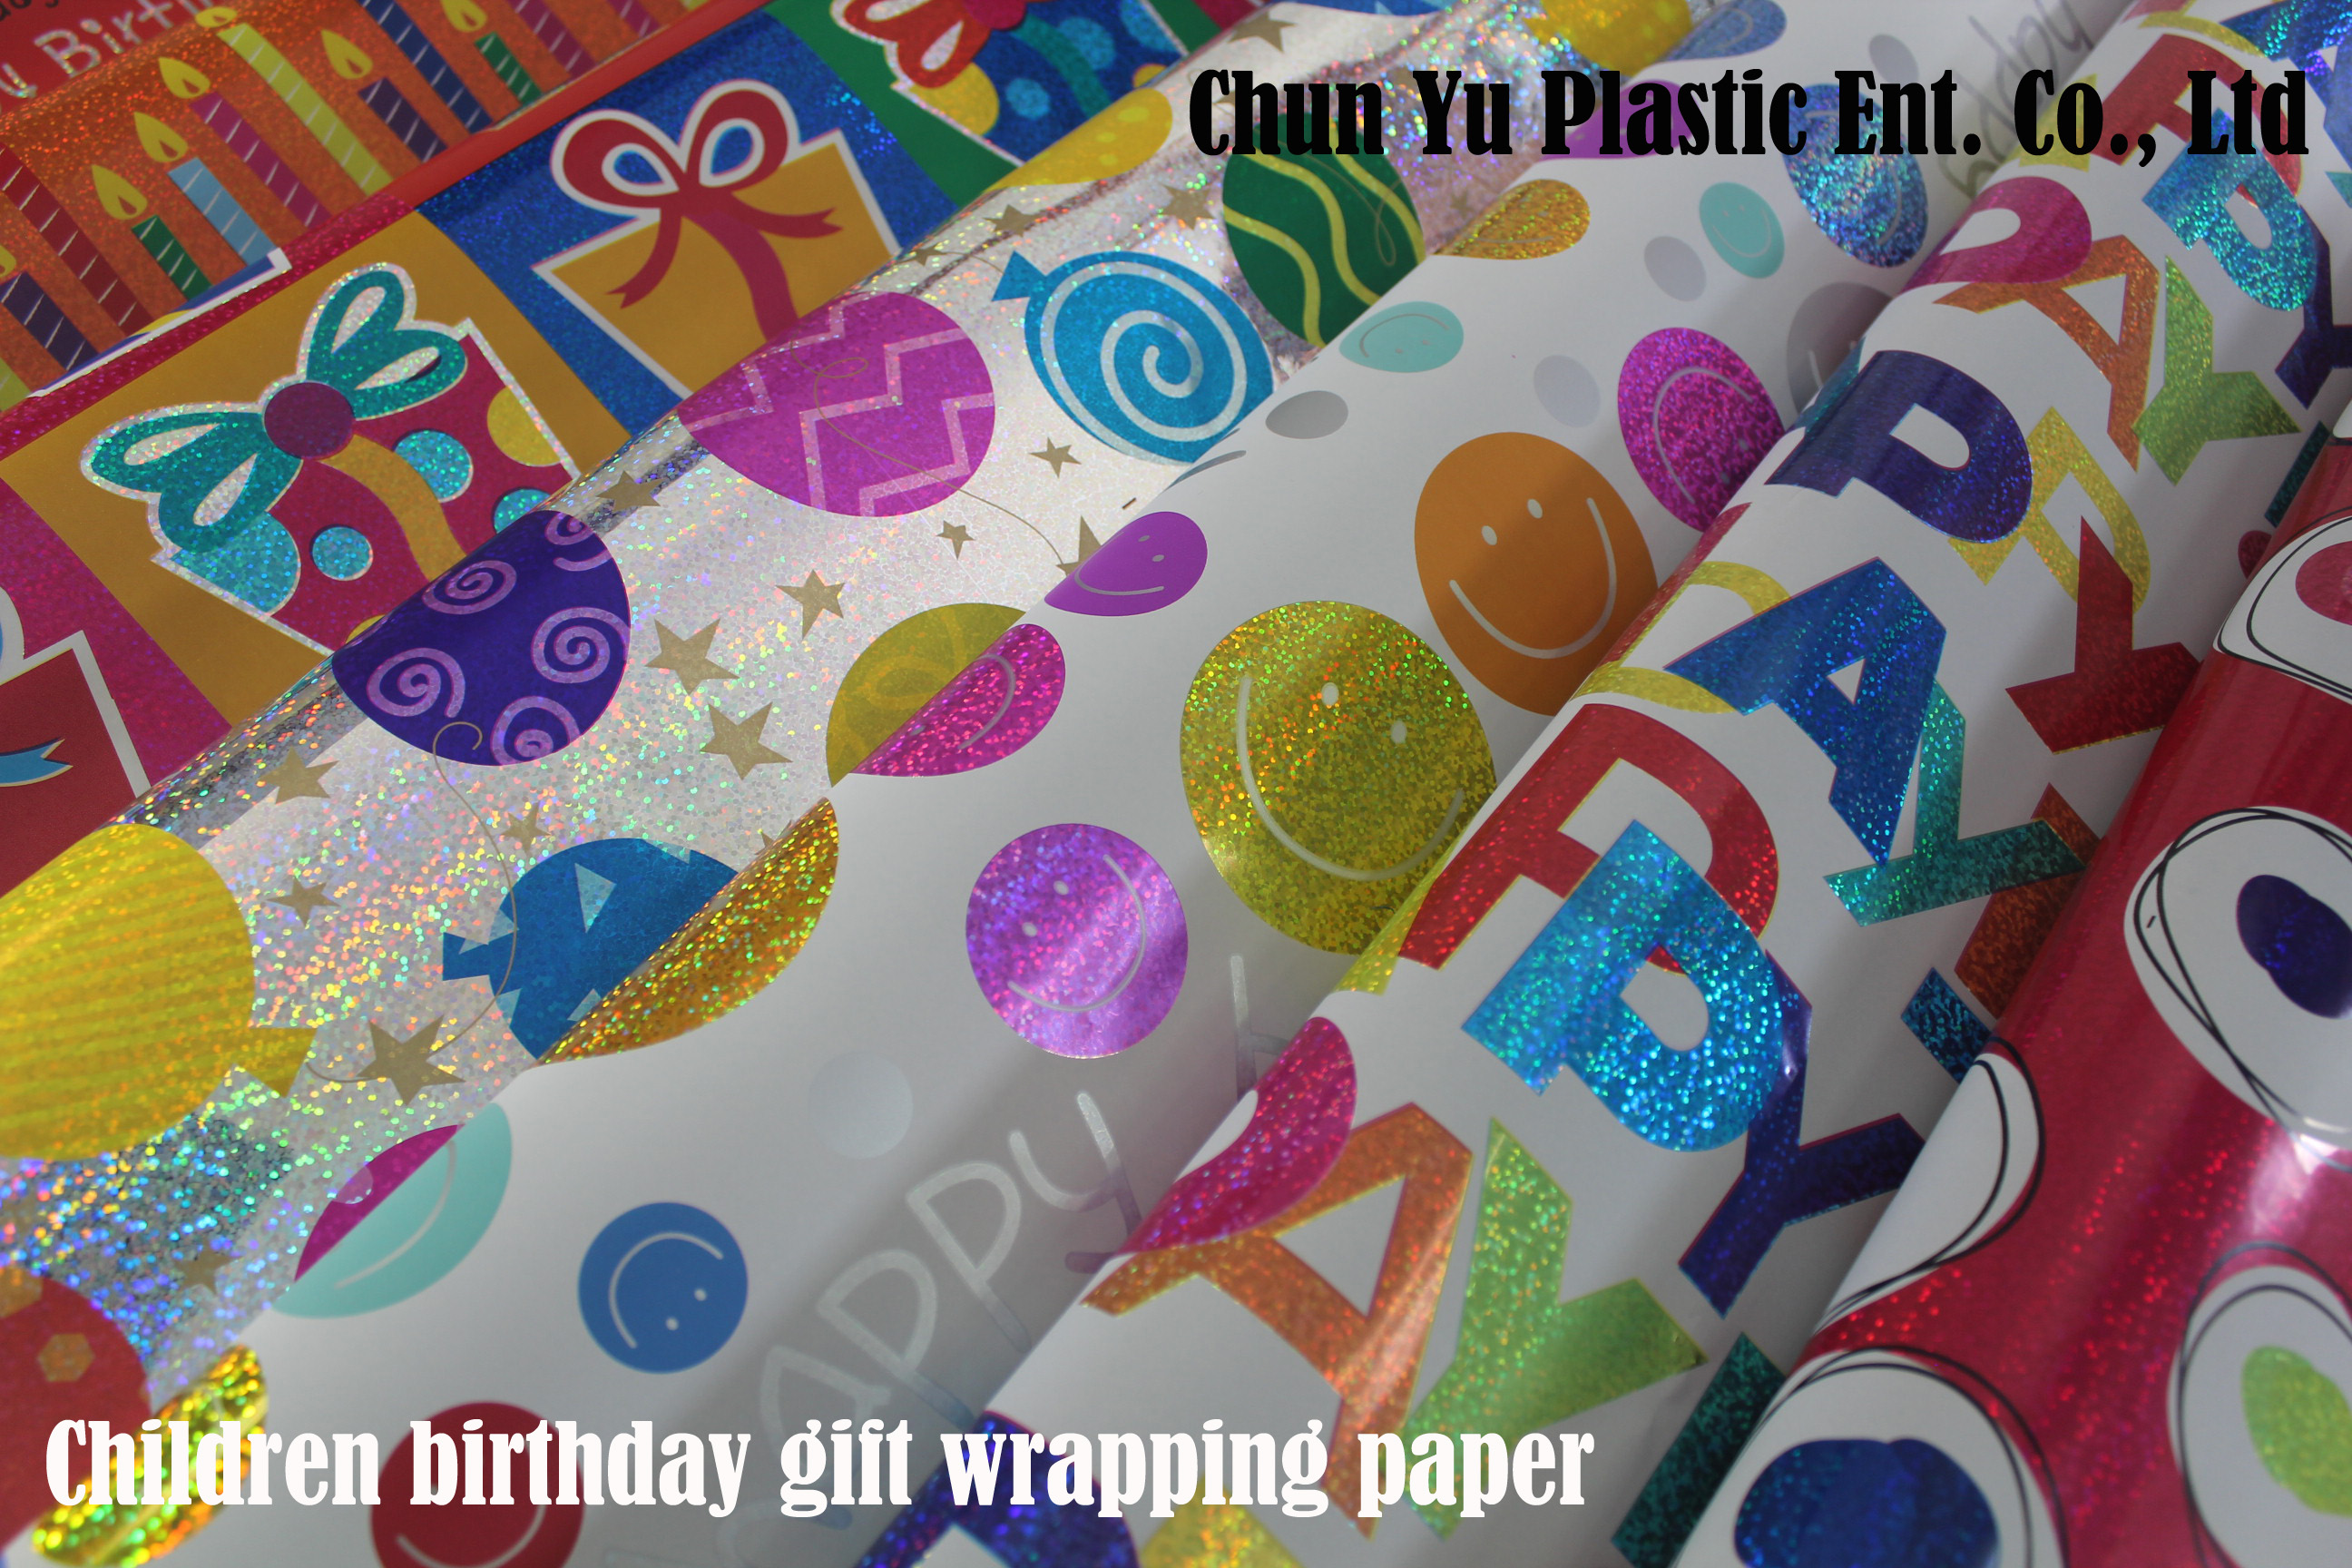 Chun Yu Plastic produces gift wrapping paper for children presents and birthday parties for girls and boys